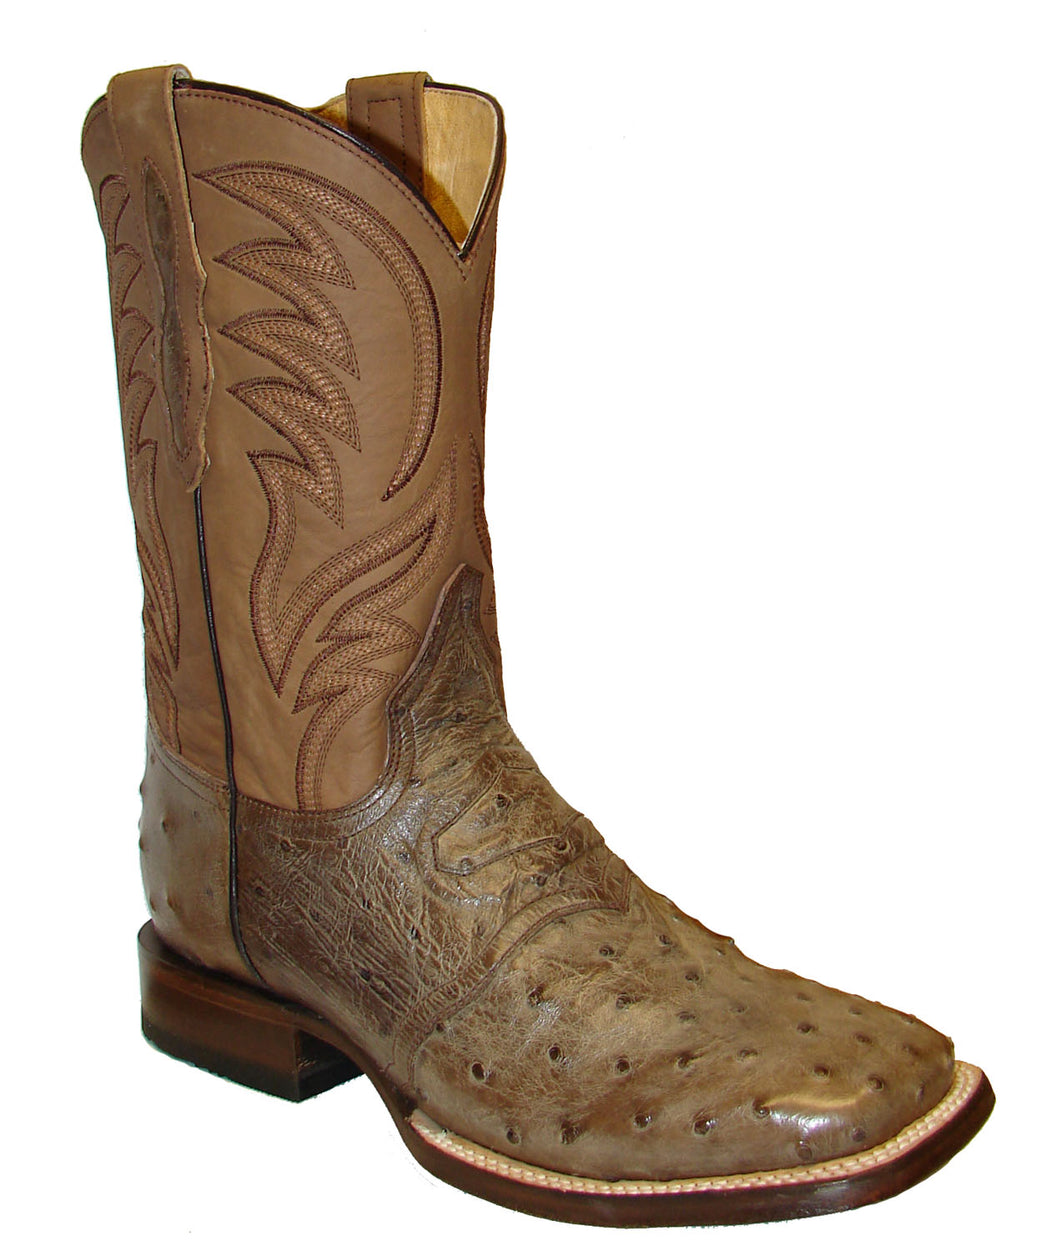 Pard's Western Shop Roper Footwear Taupe Full Quill Ostrich Boots for Men